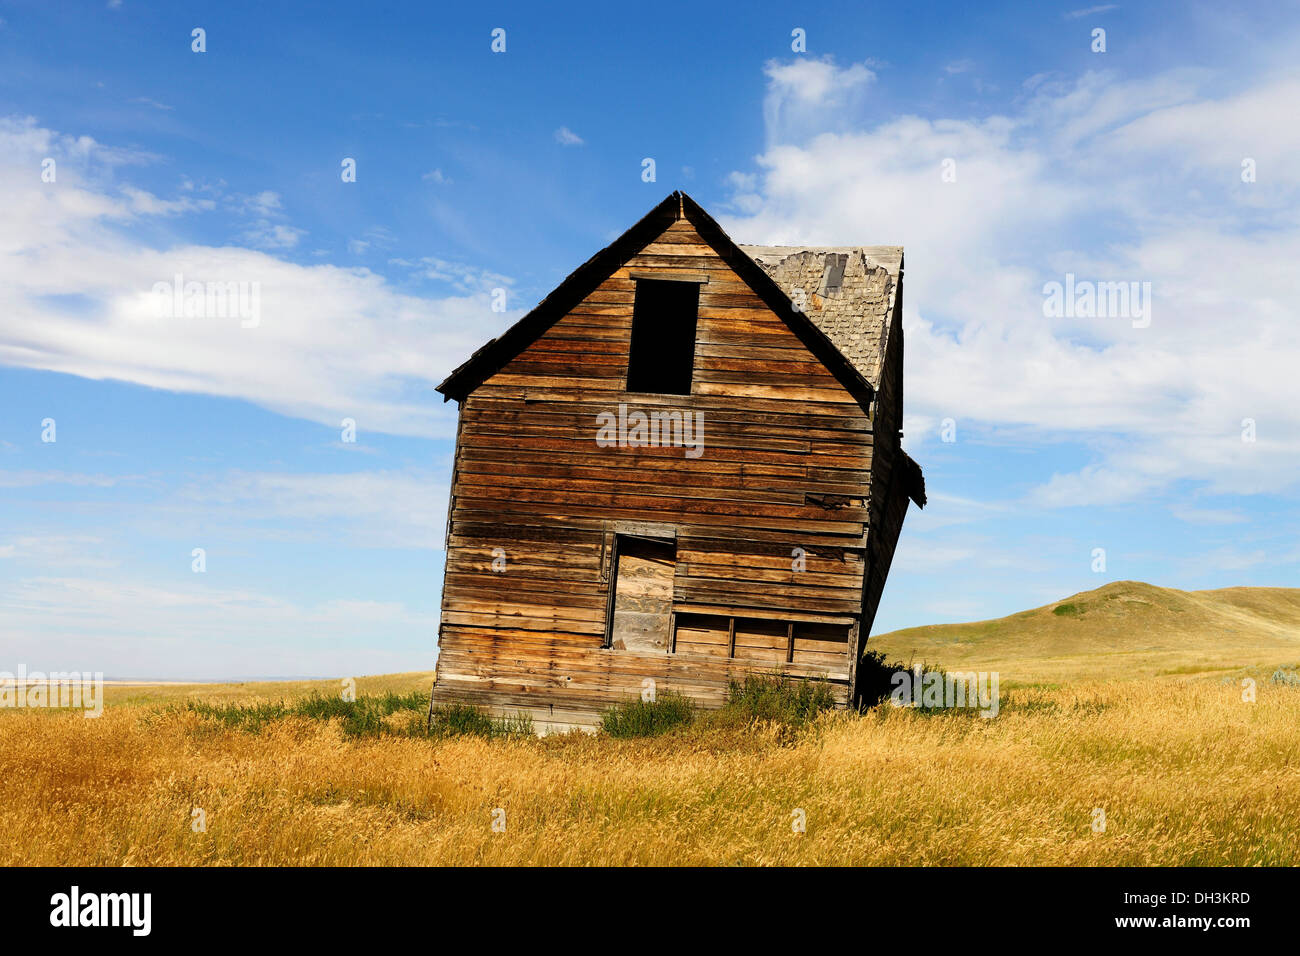 Abandoned and decaying house on the prairie, Saskatchewan Province, Canada Stock Photo